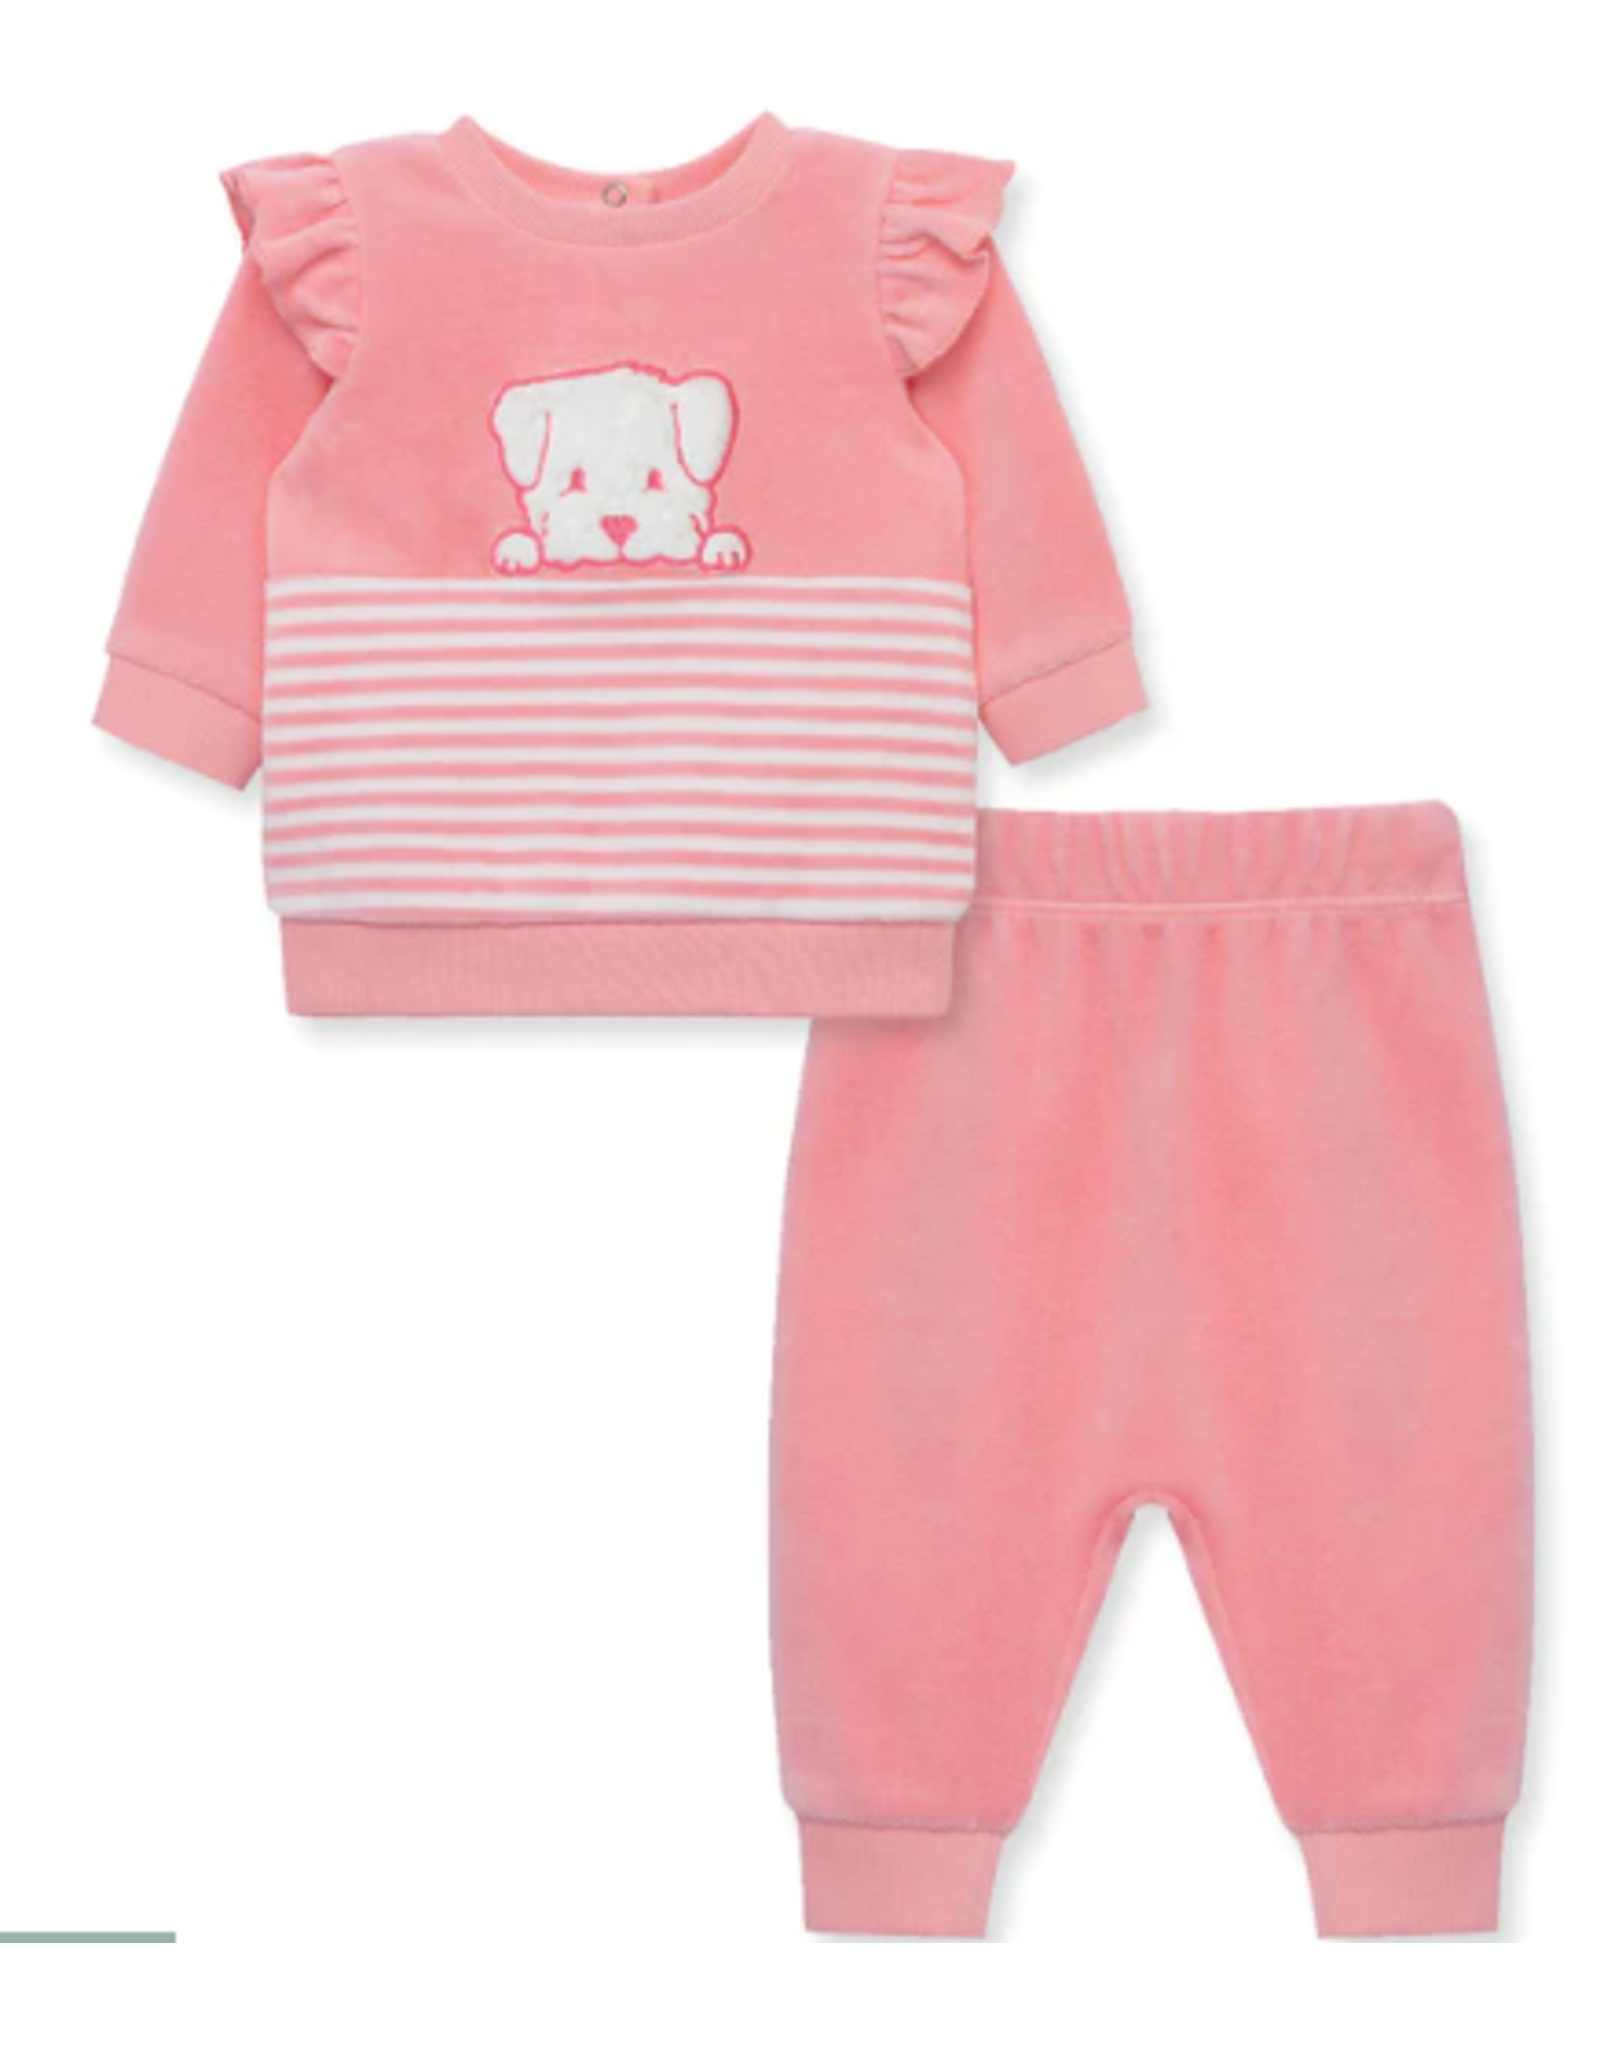 Little Me Lil' Pink Velour 2pc Outfit